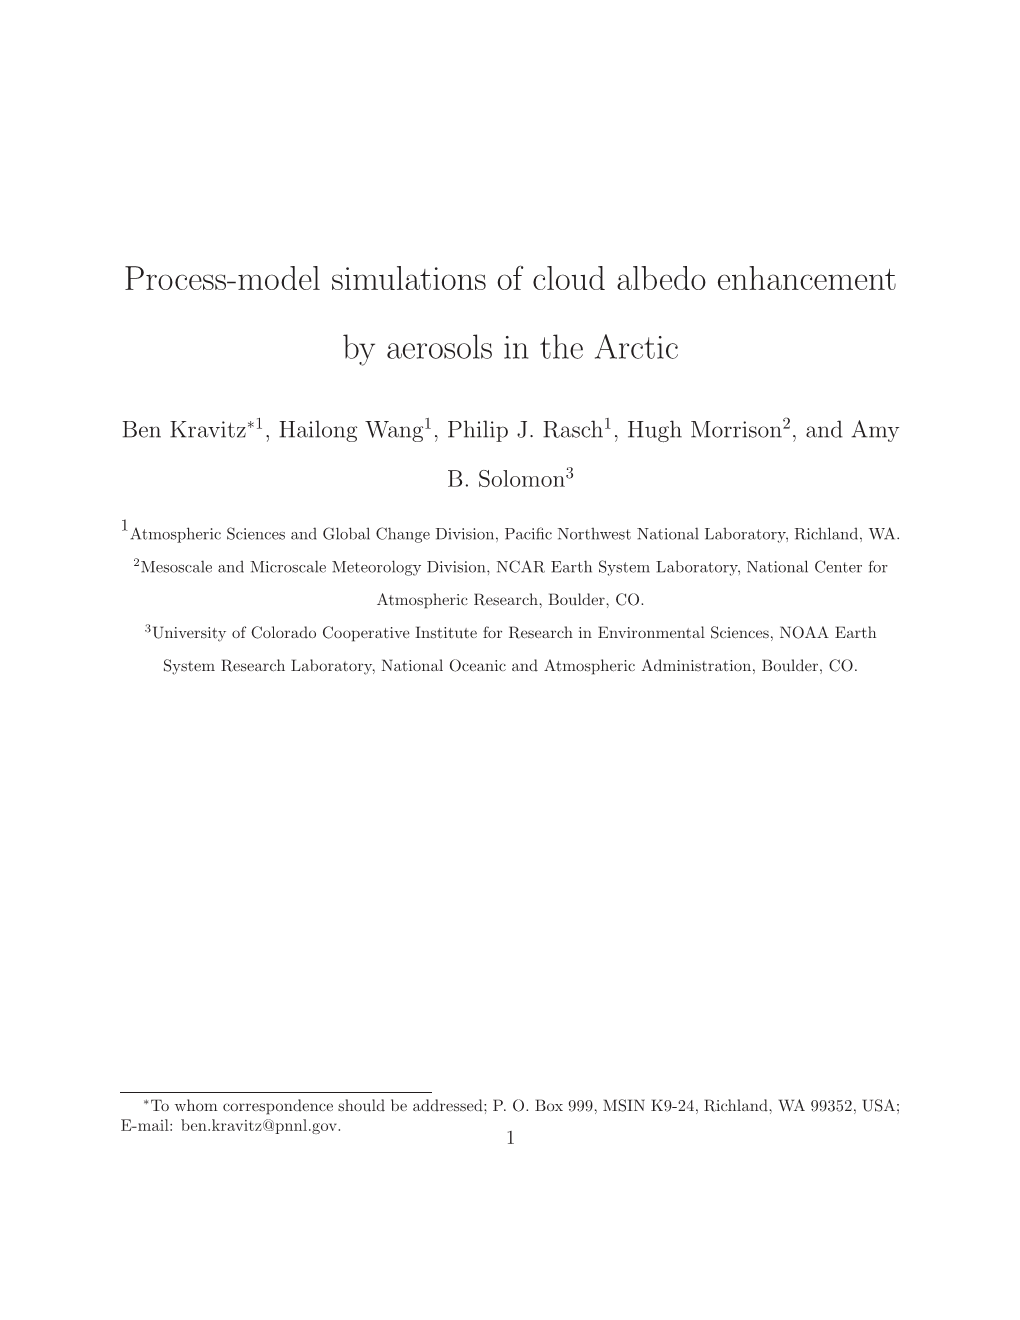 Process-Model Simulations of Cloud Albedo Enhancement by Aerosols in the Arctic